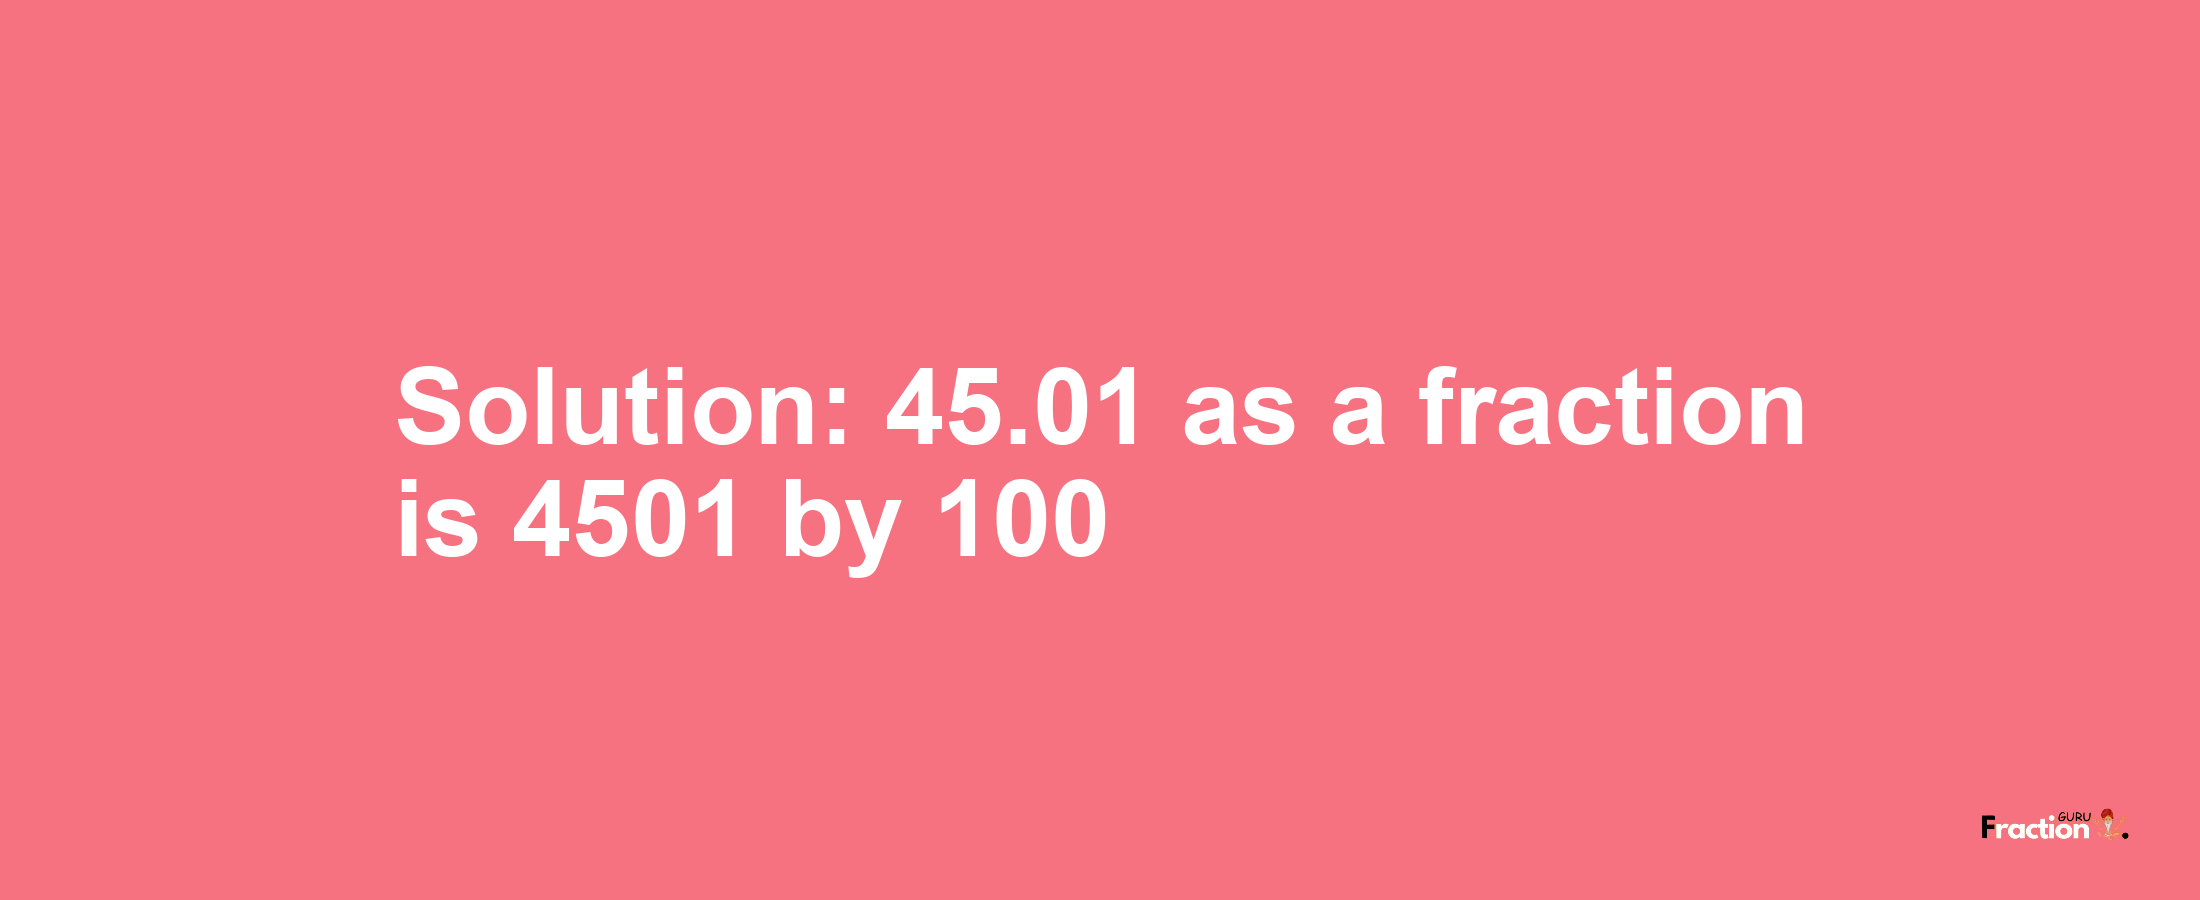 Solution:45.01 as a fraction is 4501/100